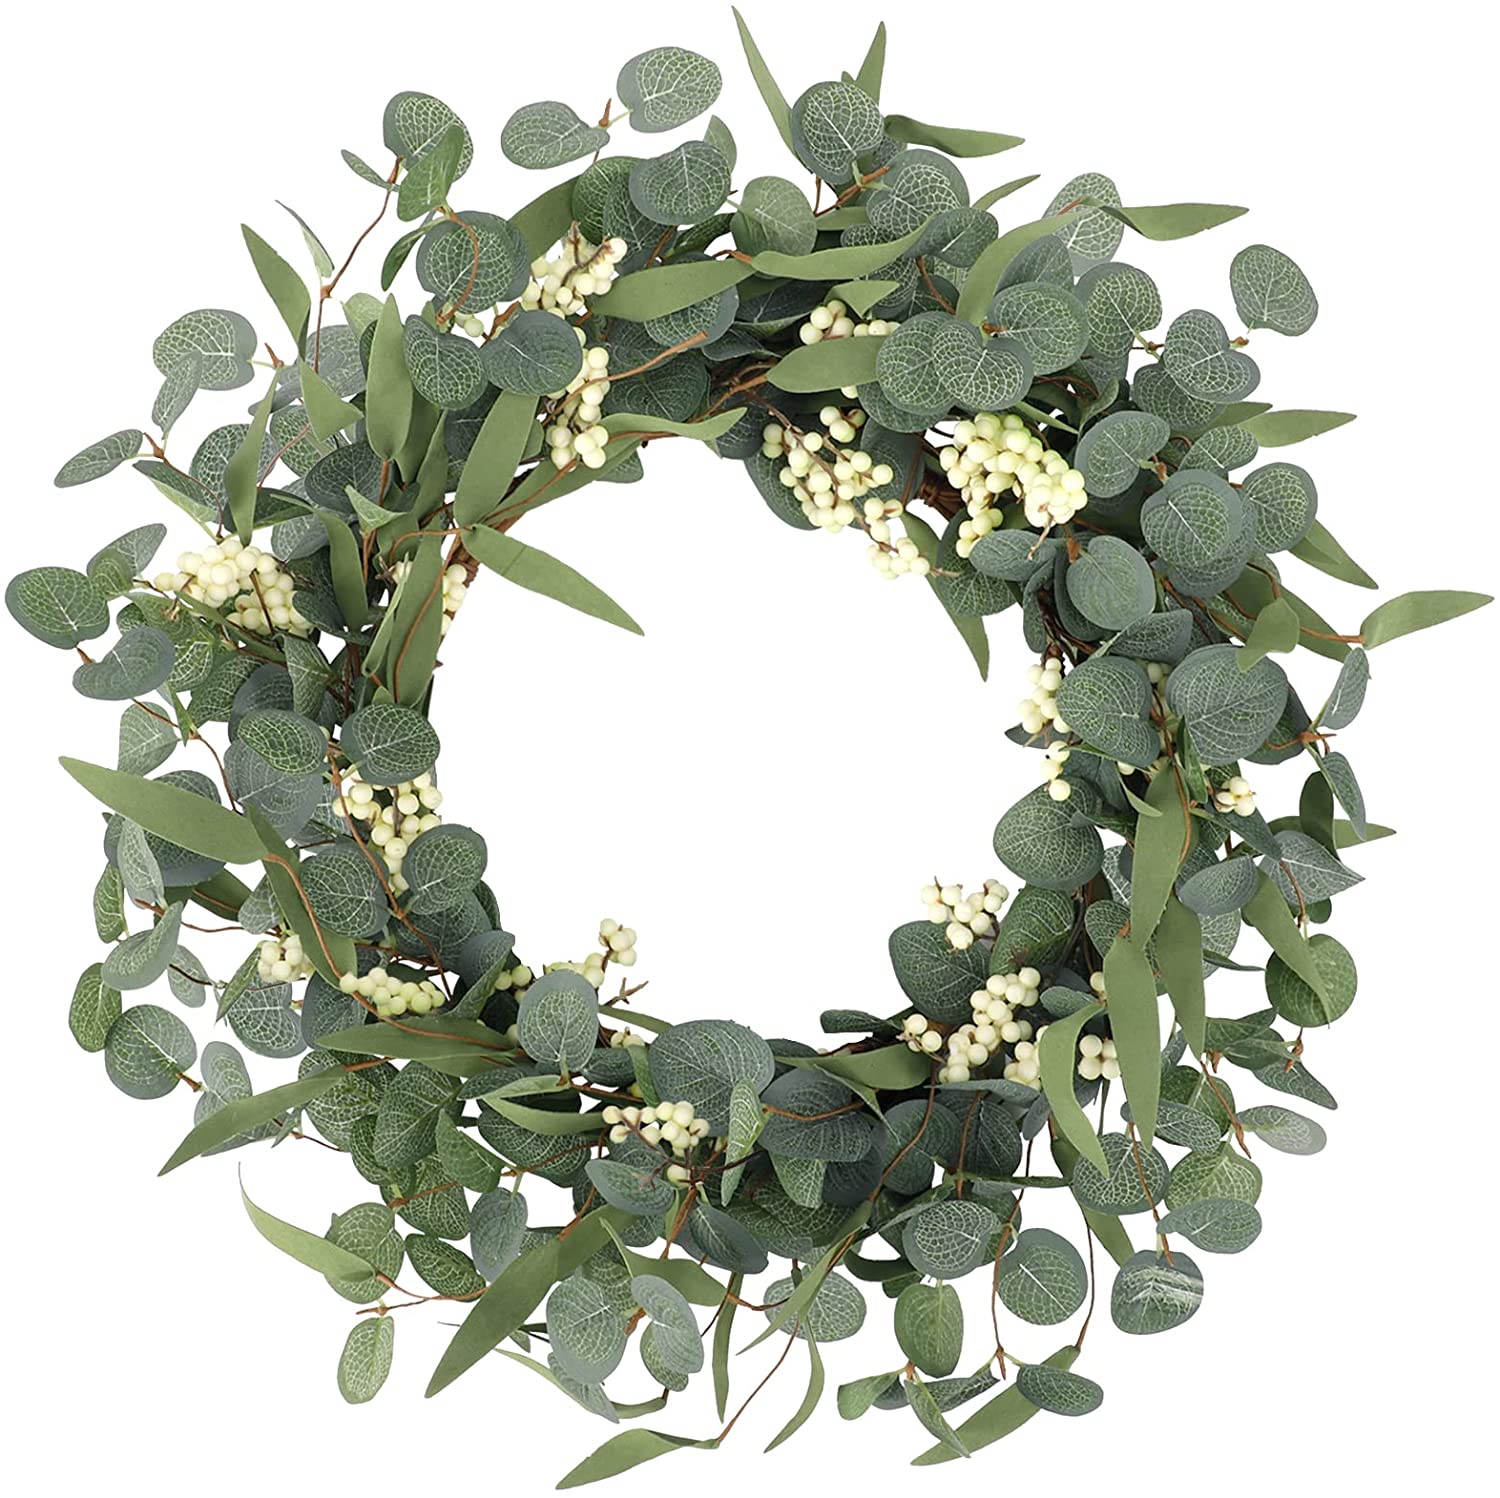 CEWOR Faux Eucalyptus & Willow Leaves Wreath, 20-Inch